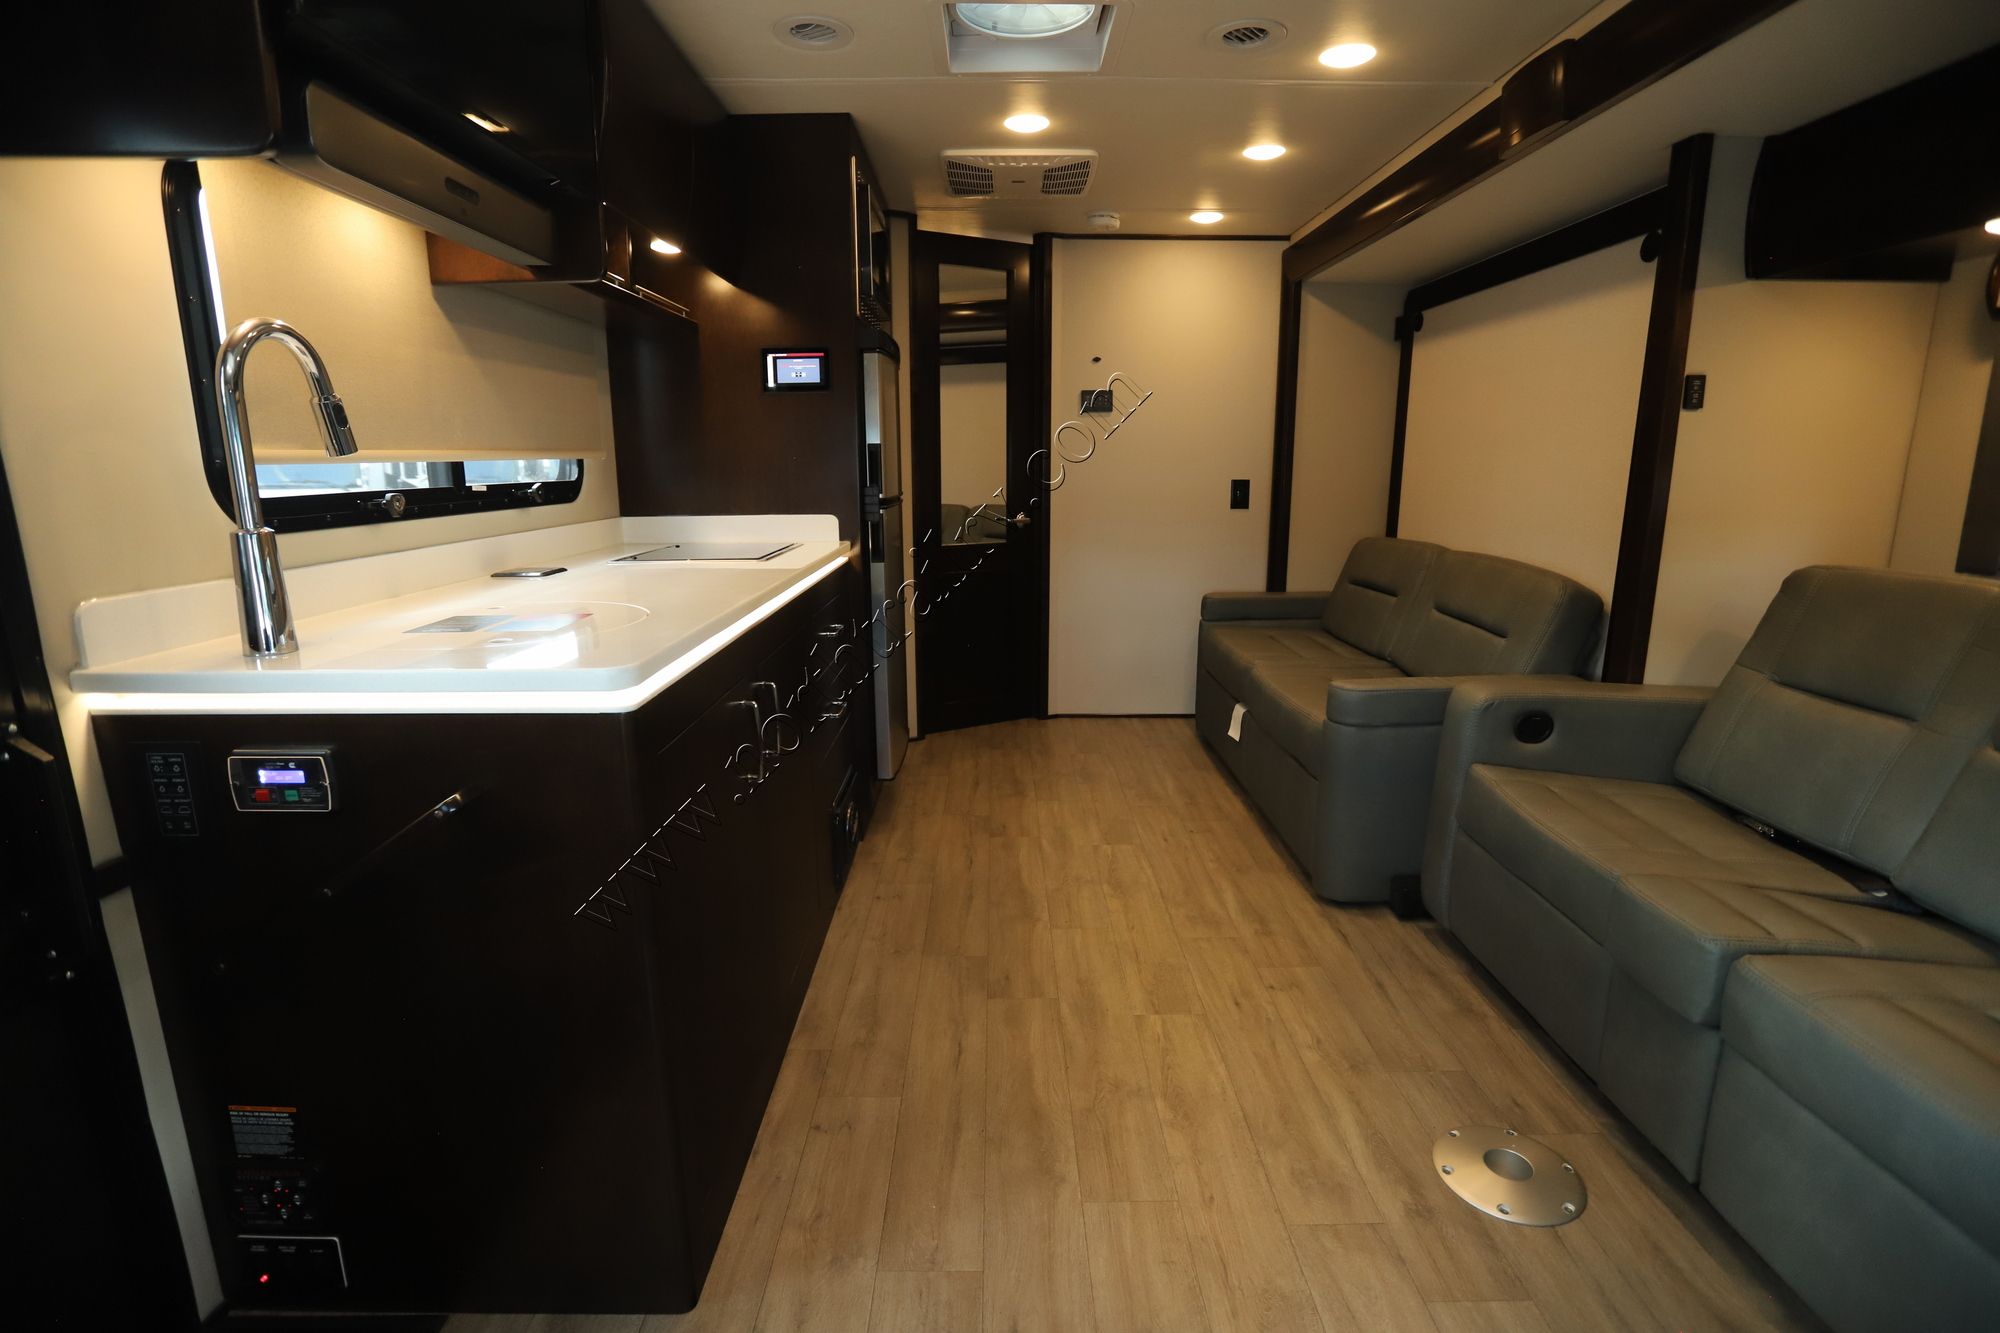 New 2023 Renegade Rv Vienna 25VRMC Class C  For Sale